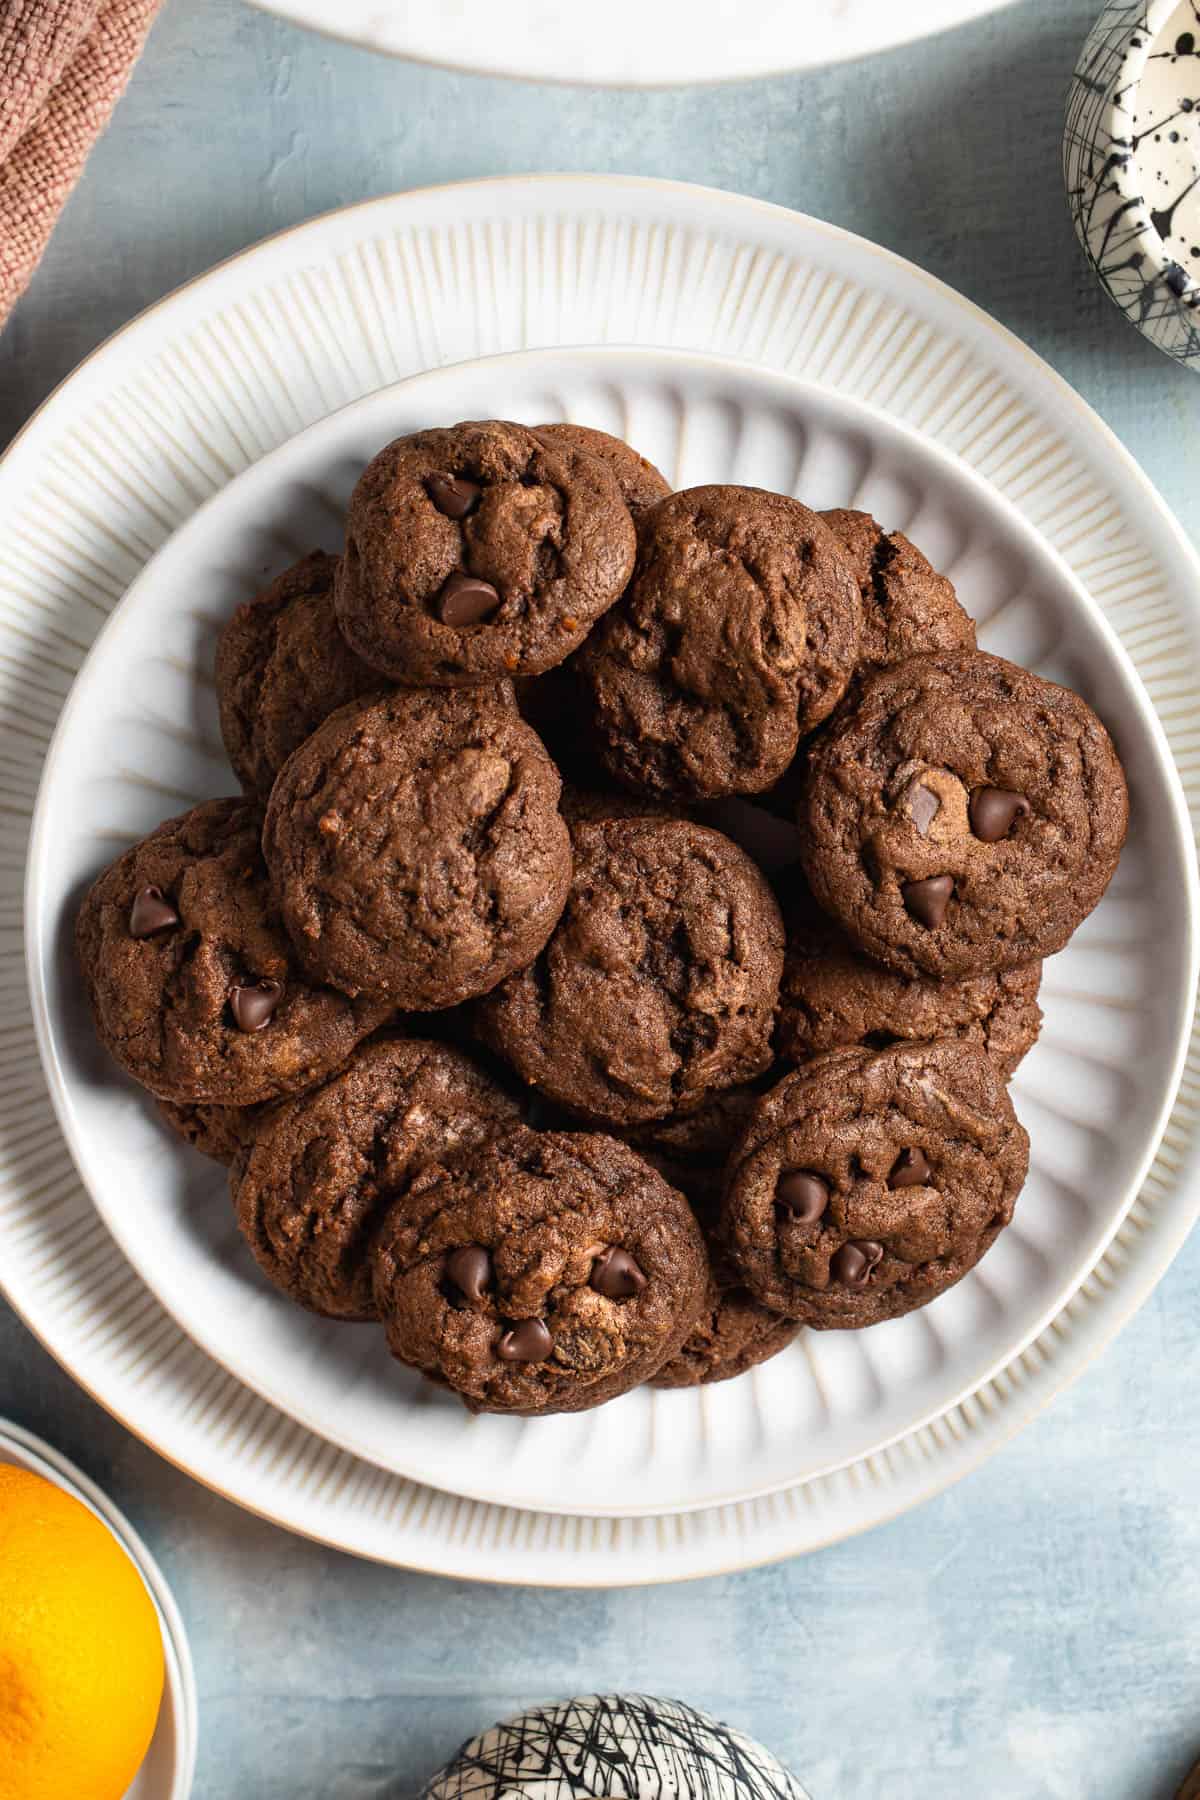 Chocolate orange cookies in a pile on a plate.